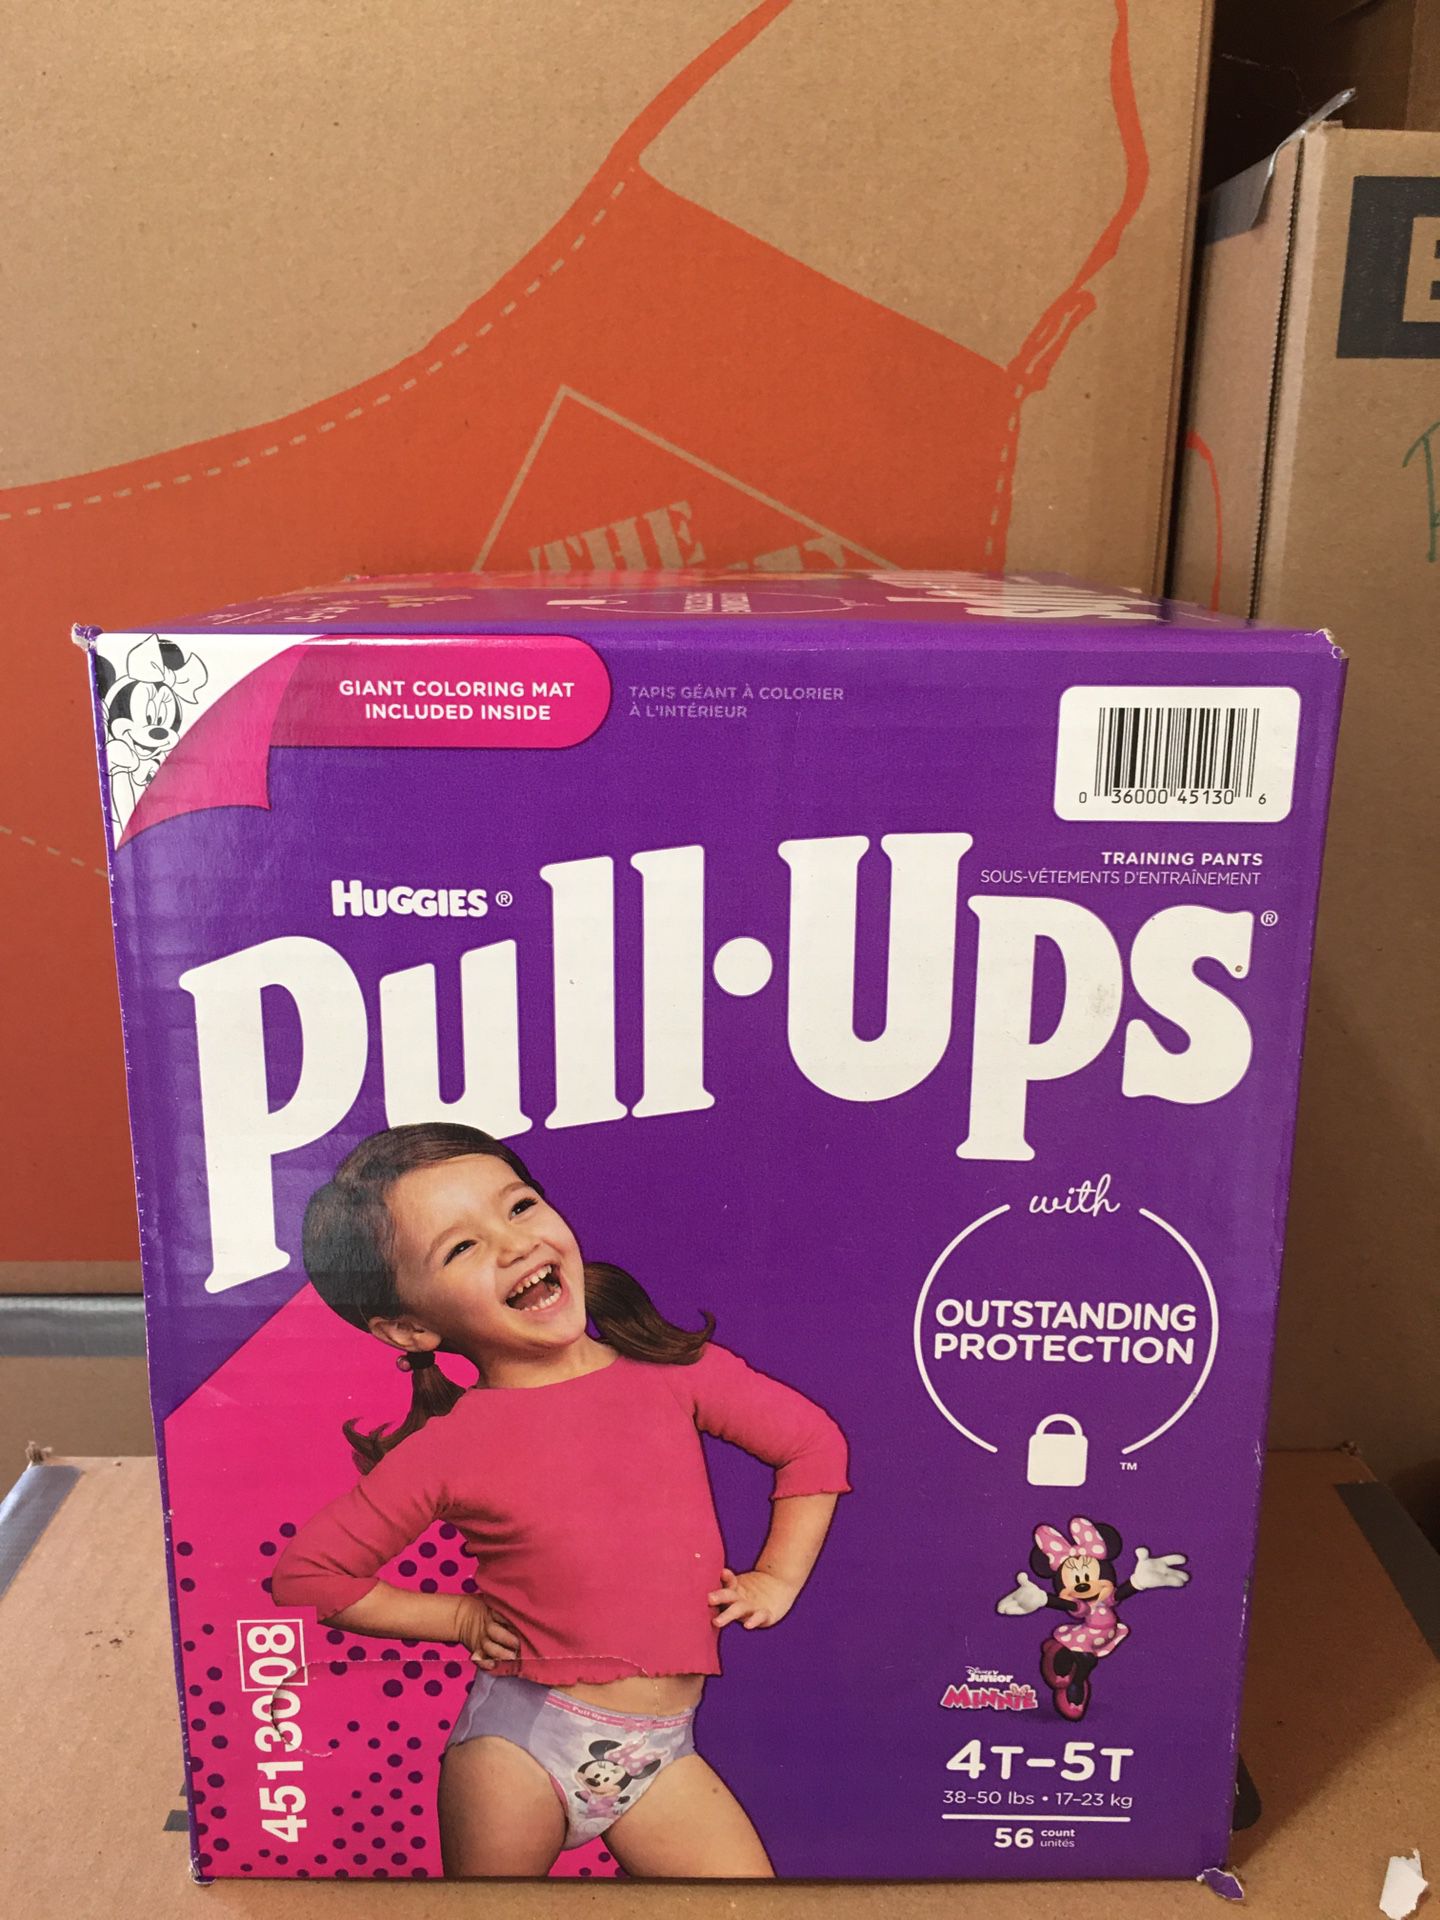 2 boxes of Huggies Pull Ups 4T-5T - (56 count)